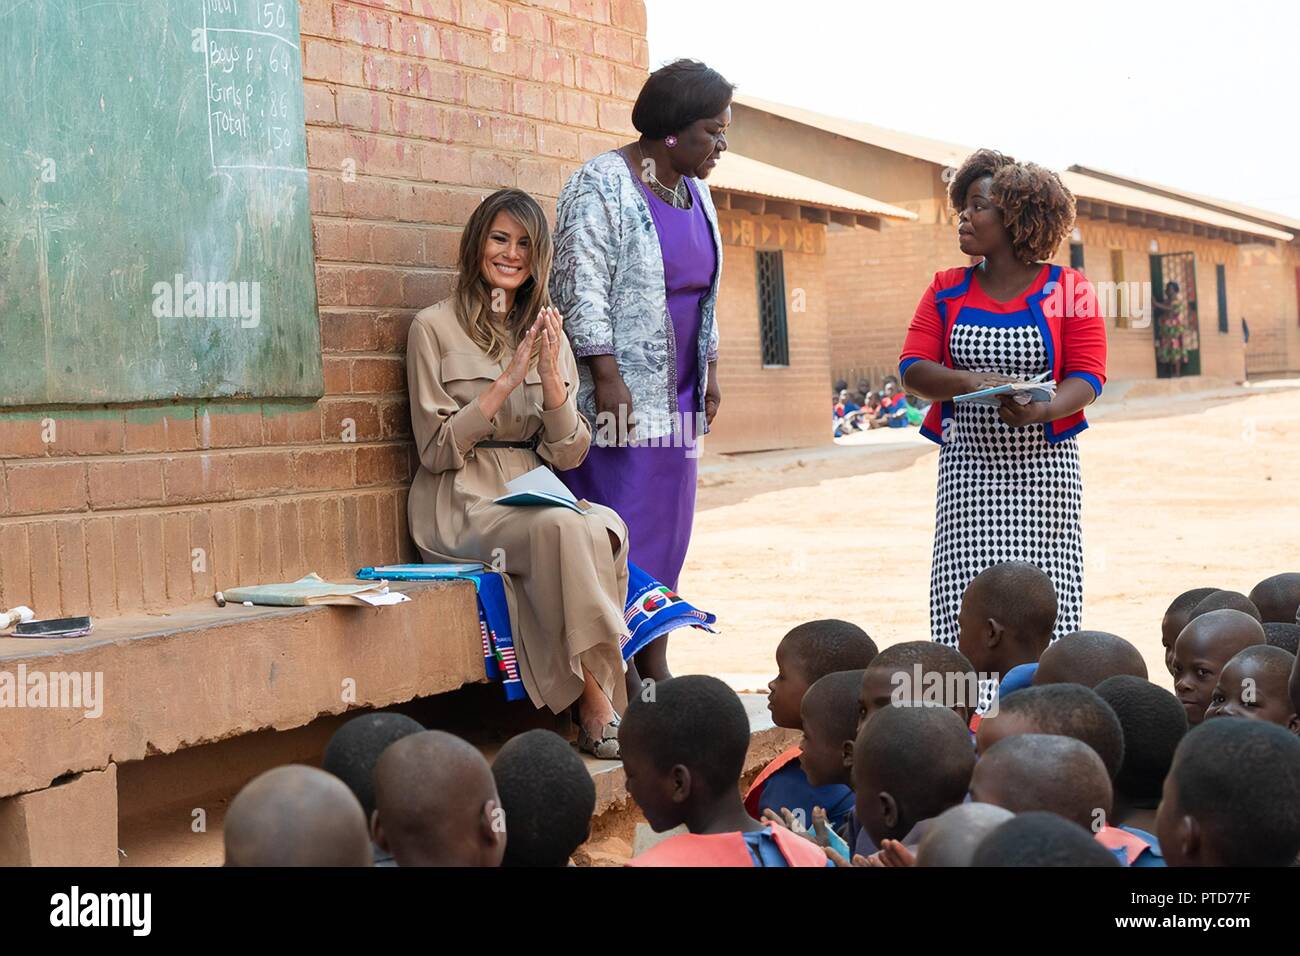 U.S First Lady Melania Trump and Headmistress Maureen Masi watch an outdoor classroom learning the English and Chichewa languages at the Chipala Primary School October 4, 2018 in Lilongwe, Malawi. This is the first solo international trip by the First Lady. Stock Photo